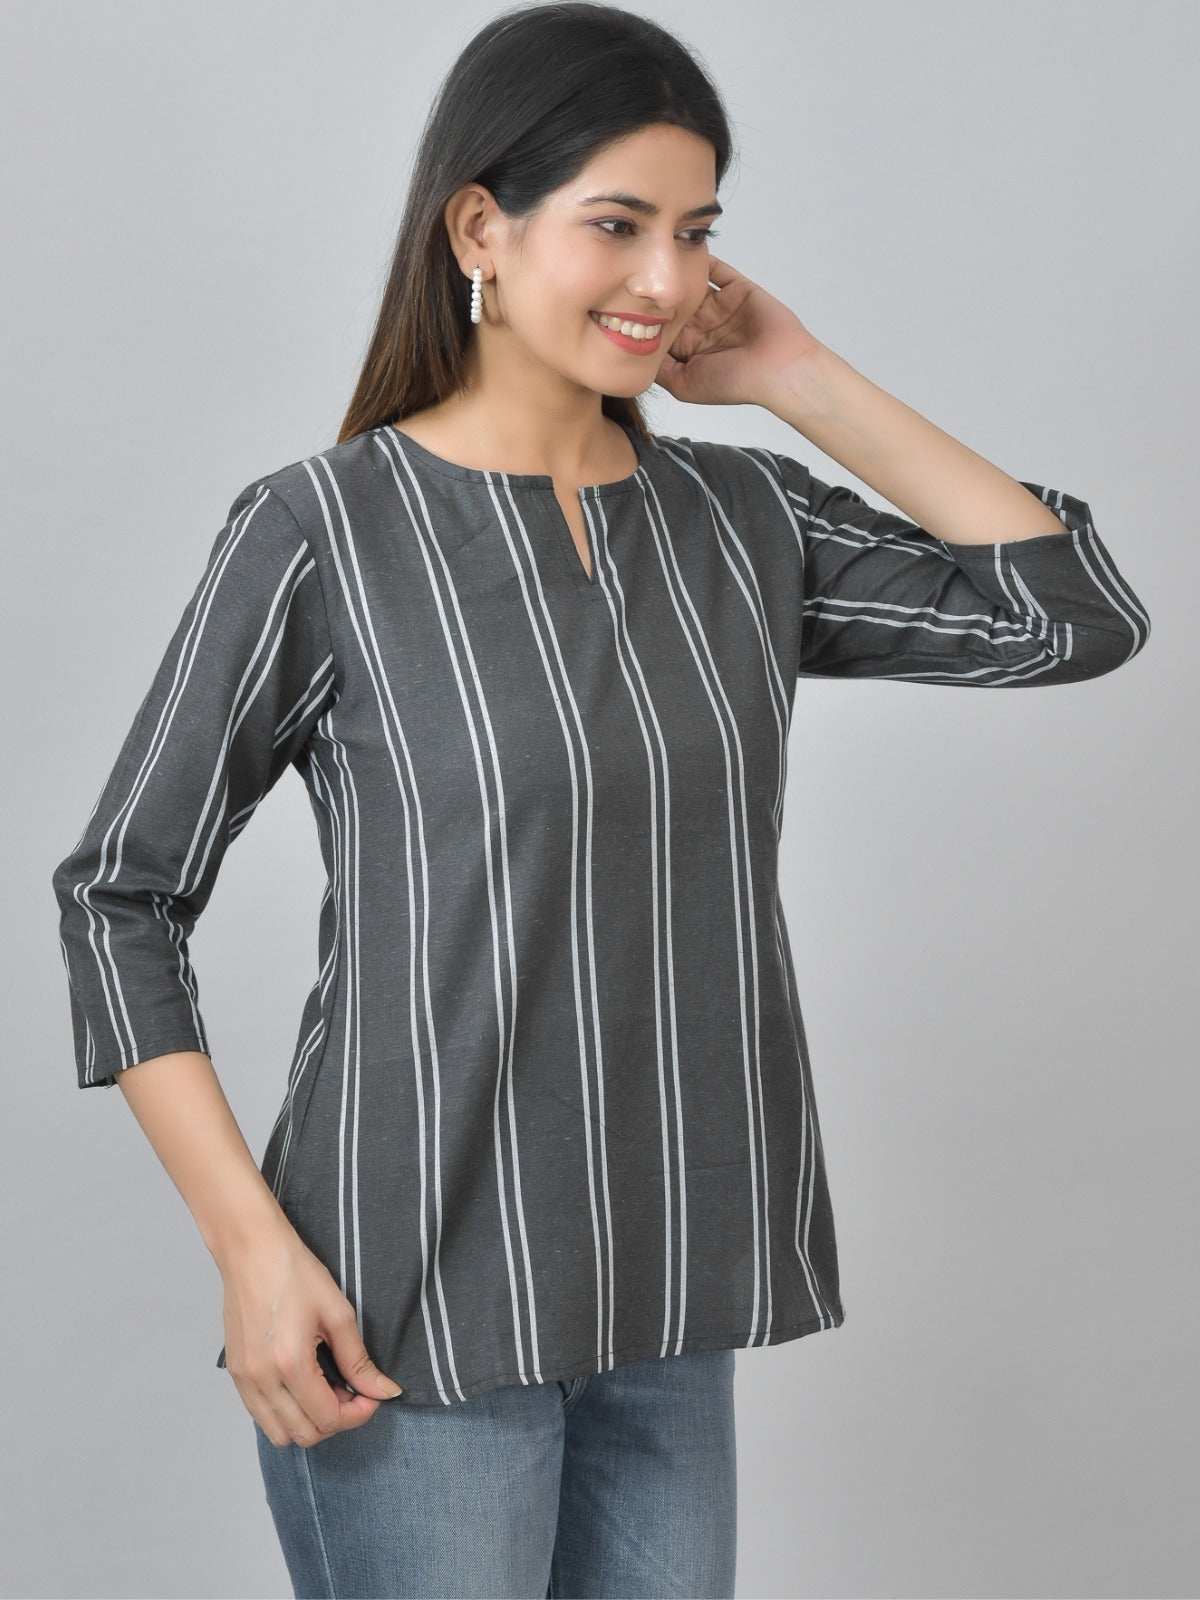 Pack Of 2 Black And Brown Striped Cotton Womens Top Combo